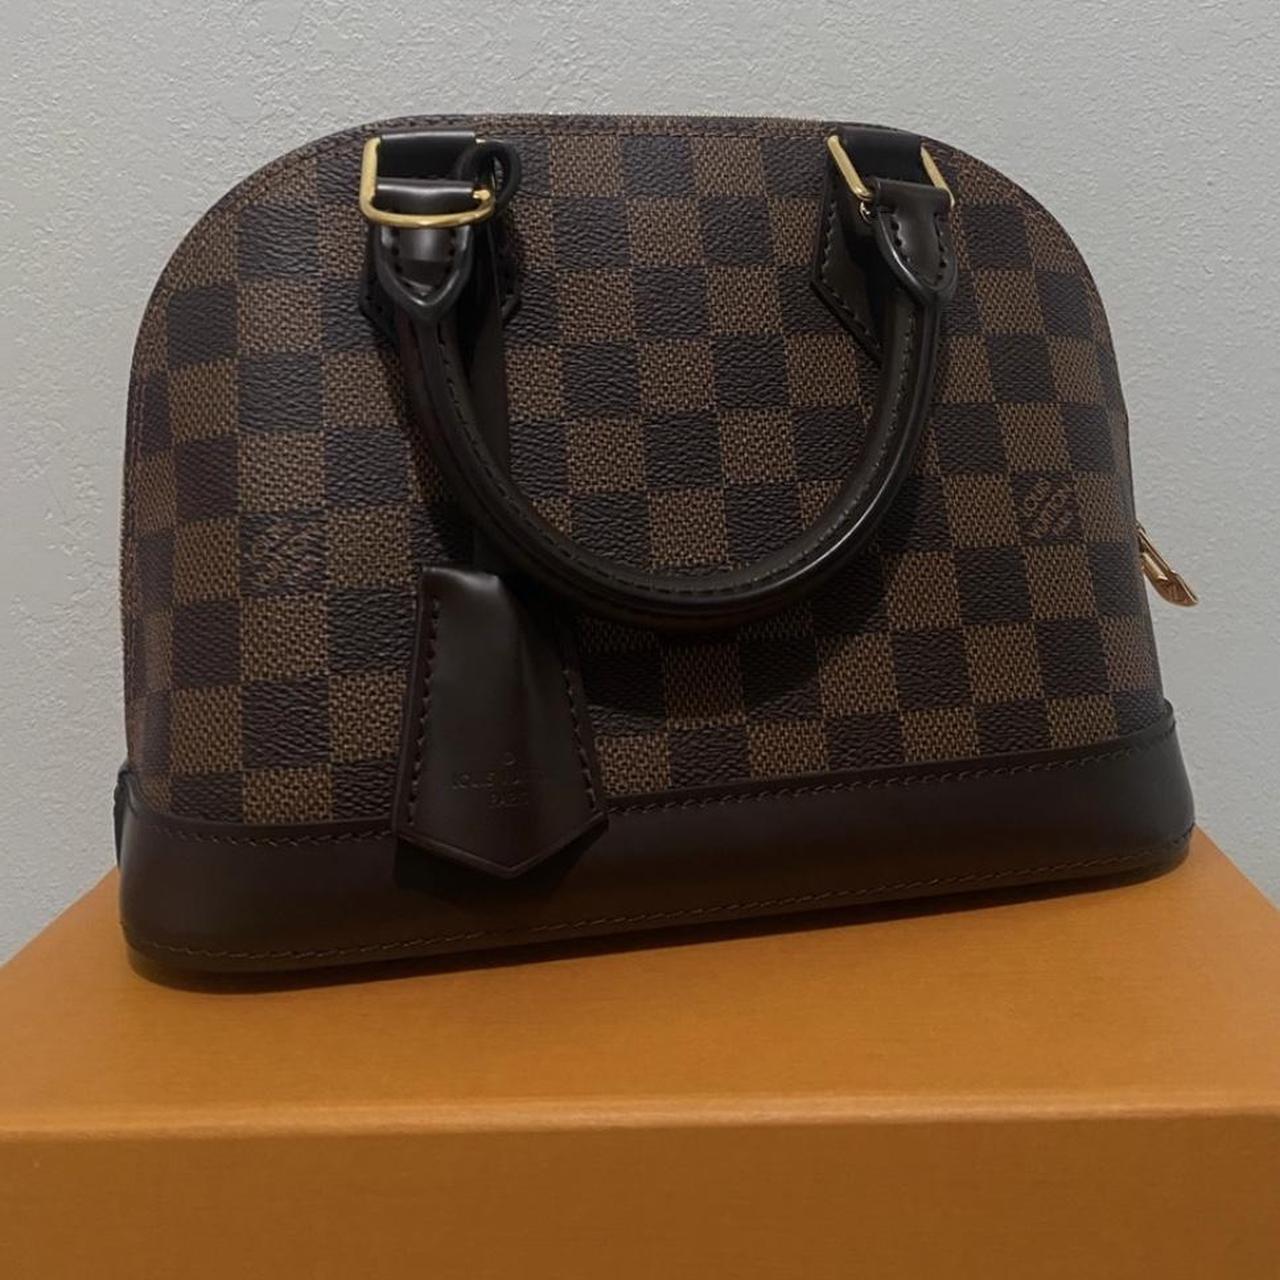 Louis Vuitton The Coffee Cup pouch was unveiled at - Depop